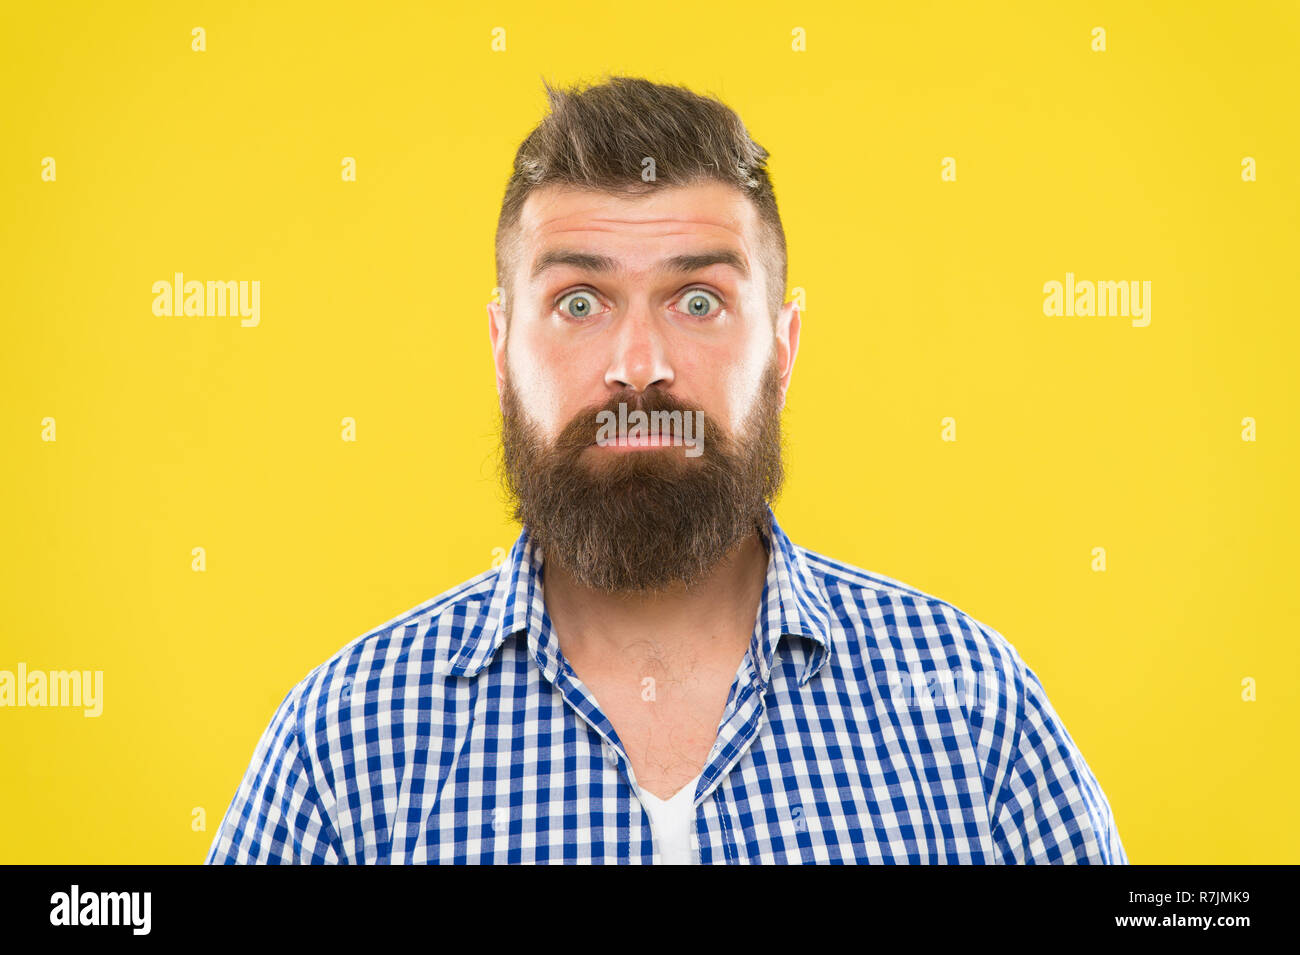 Surprising news. Man bearded hipster wondering face yellow background close up. Guy surprised face expression. Hipster with beard and mustache emotional surprised expression. Rustic surprised macho. Stock Photo